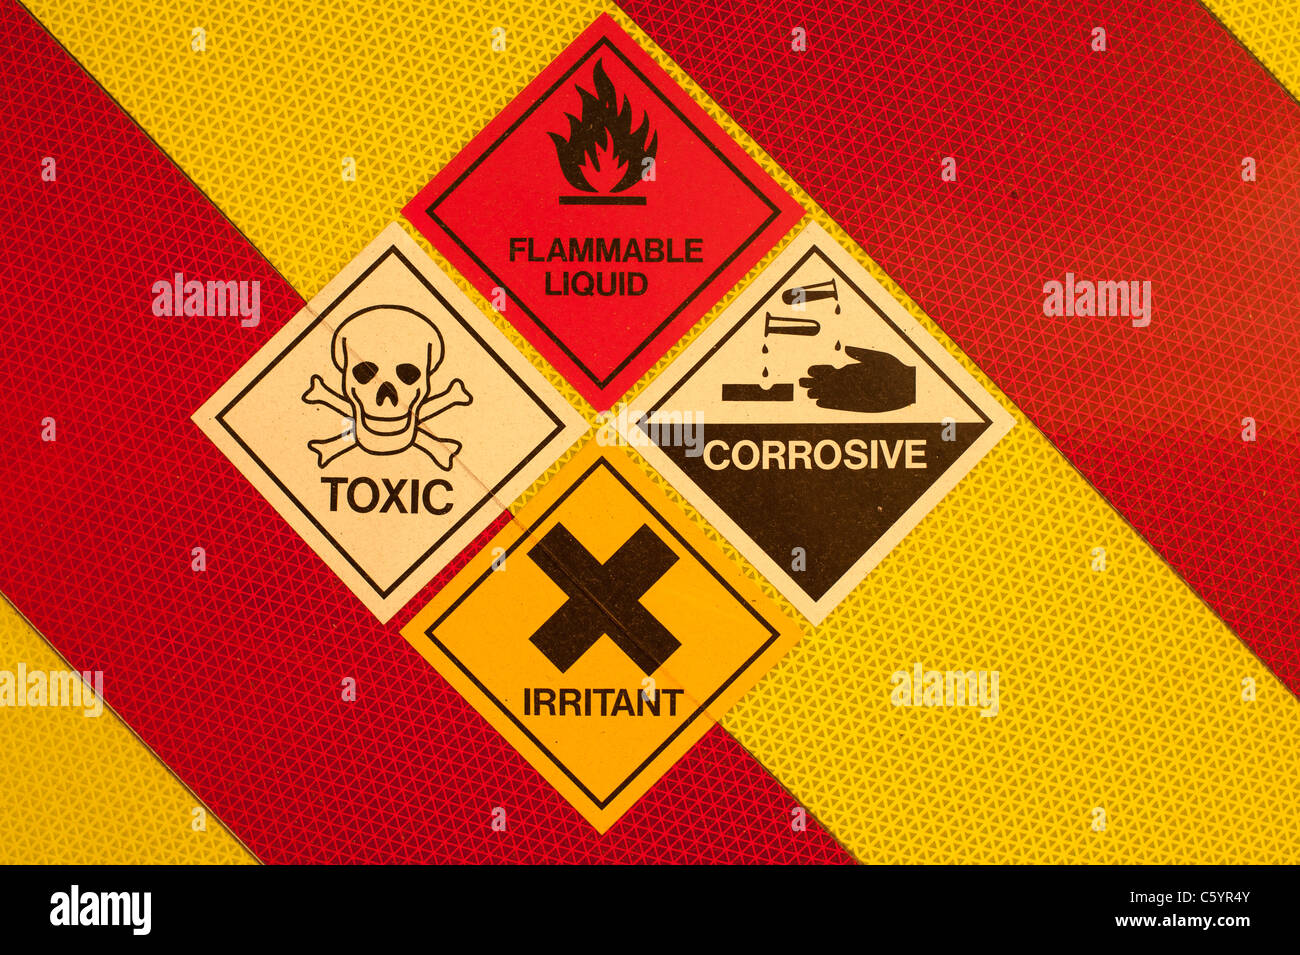 A set of Danger flammable liquid toxic corrosive irritant chemicals and liquids warning symbols on red and yellow UK Stock Photo